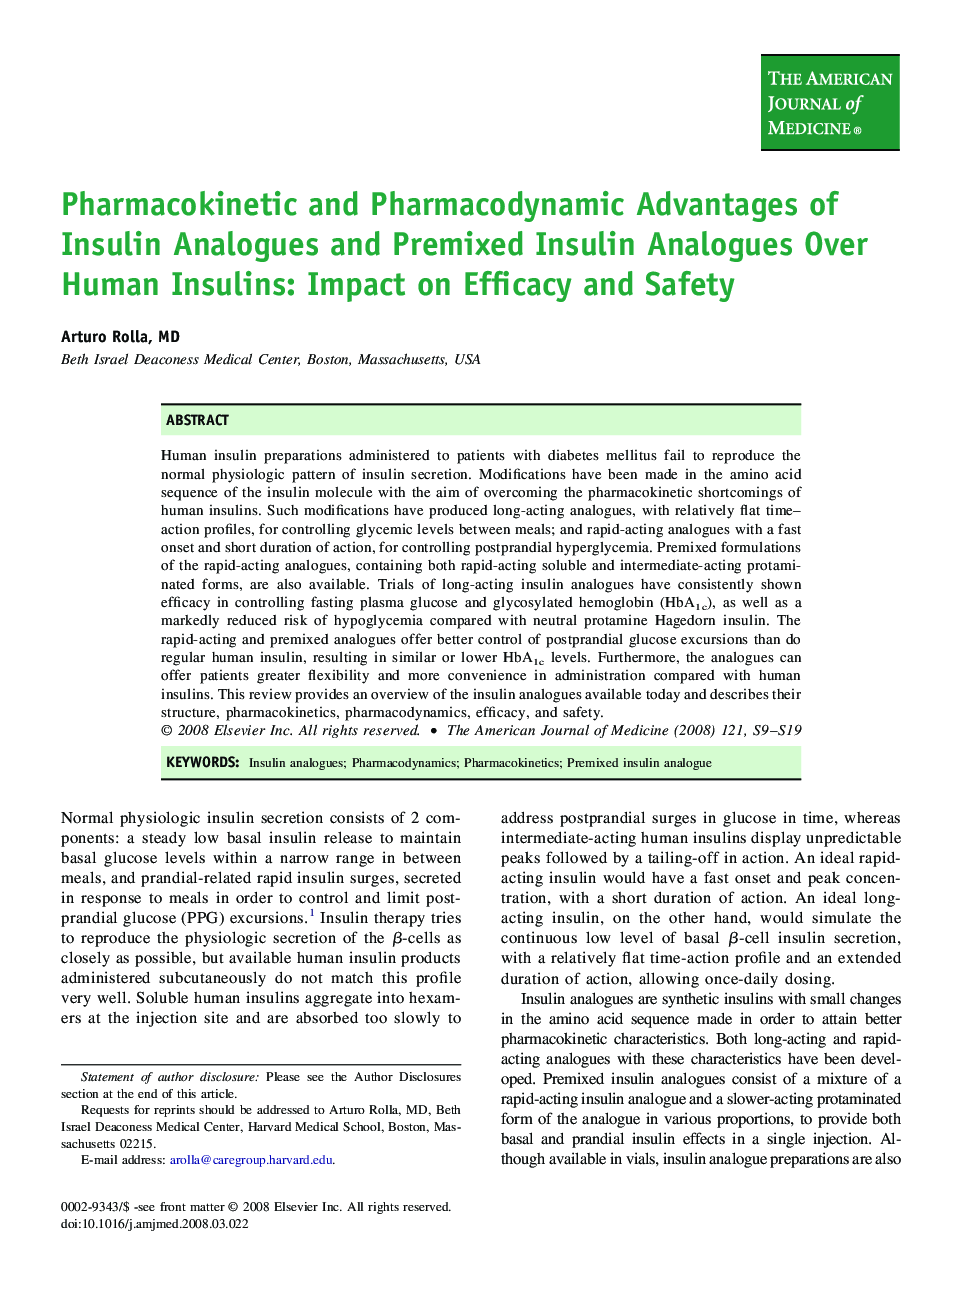 Pharmacokinetic and Pharmacodynamic Advantages of Insulin Analogues and Premixed Insulin Analogues Over Human Insulins: Impact on Efficacy and Safety 